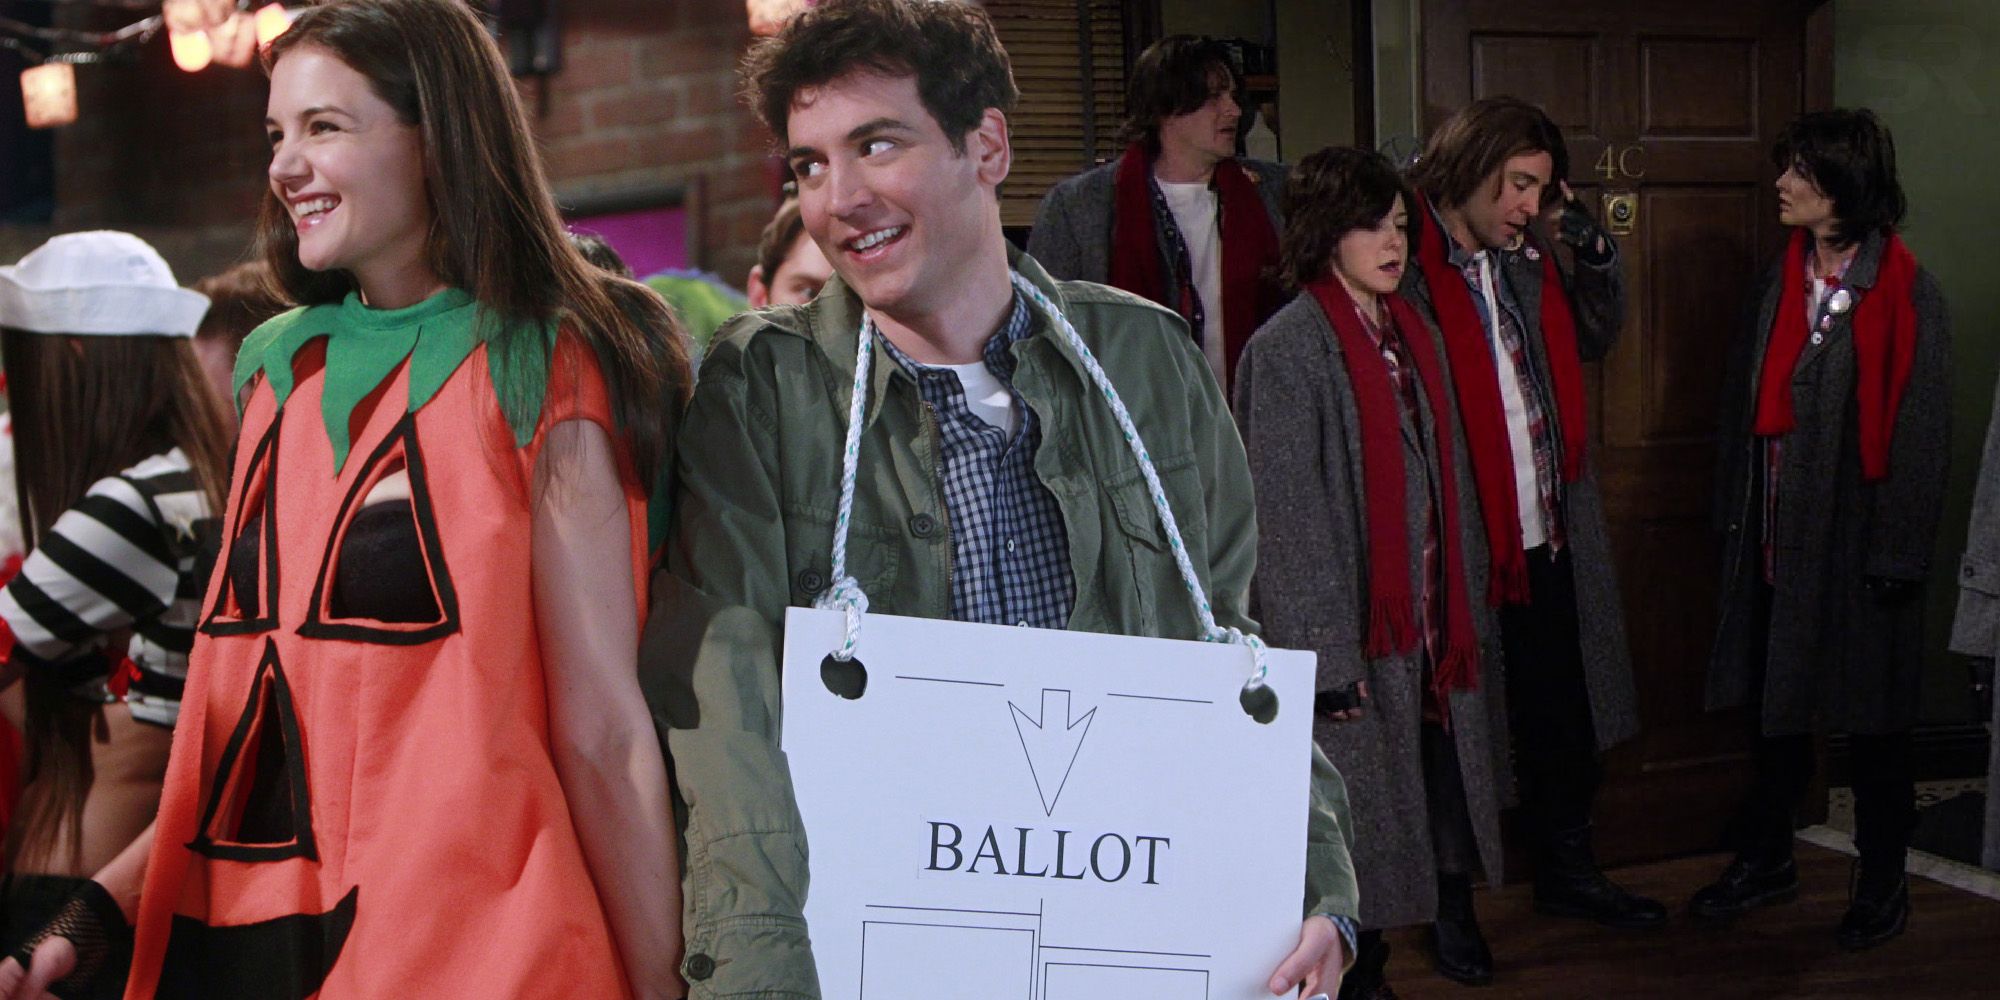 How I Met Your Mother: Every Halloween Costume Worn By The Major Characters...